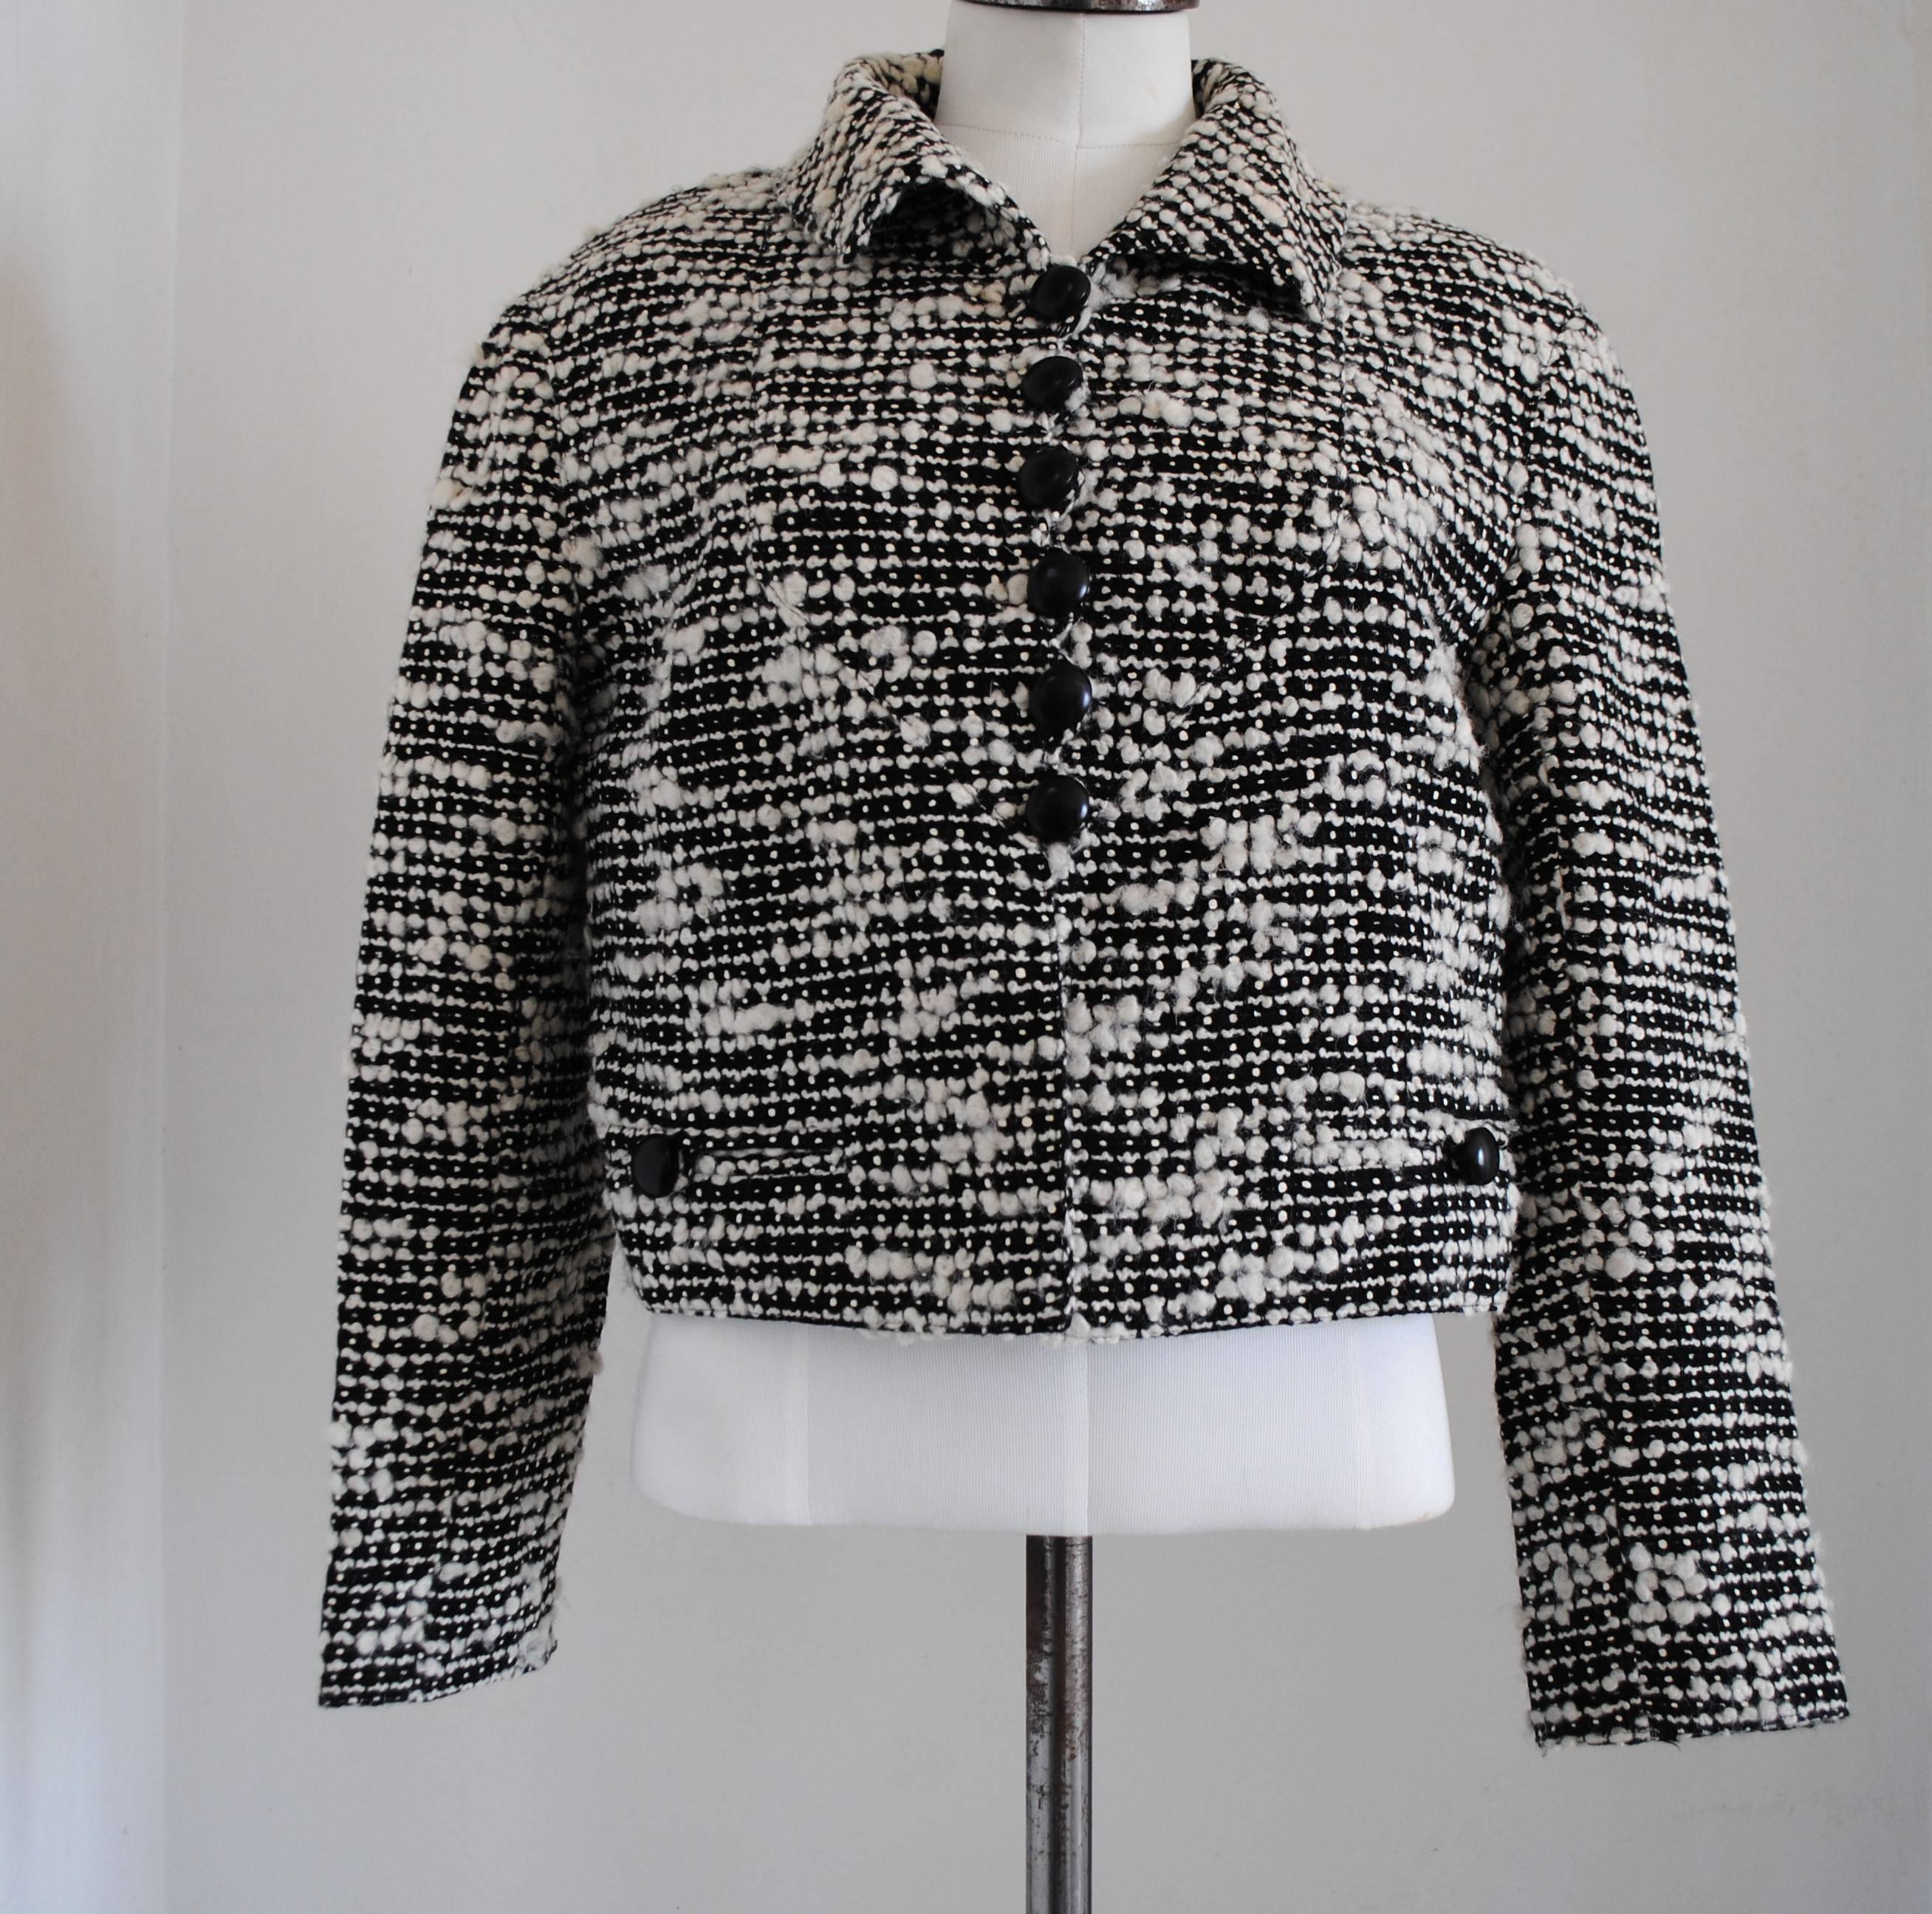 Valentino Black and White Jacket In Excellent Condition For Sale In Capri, IT